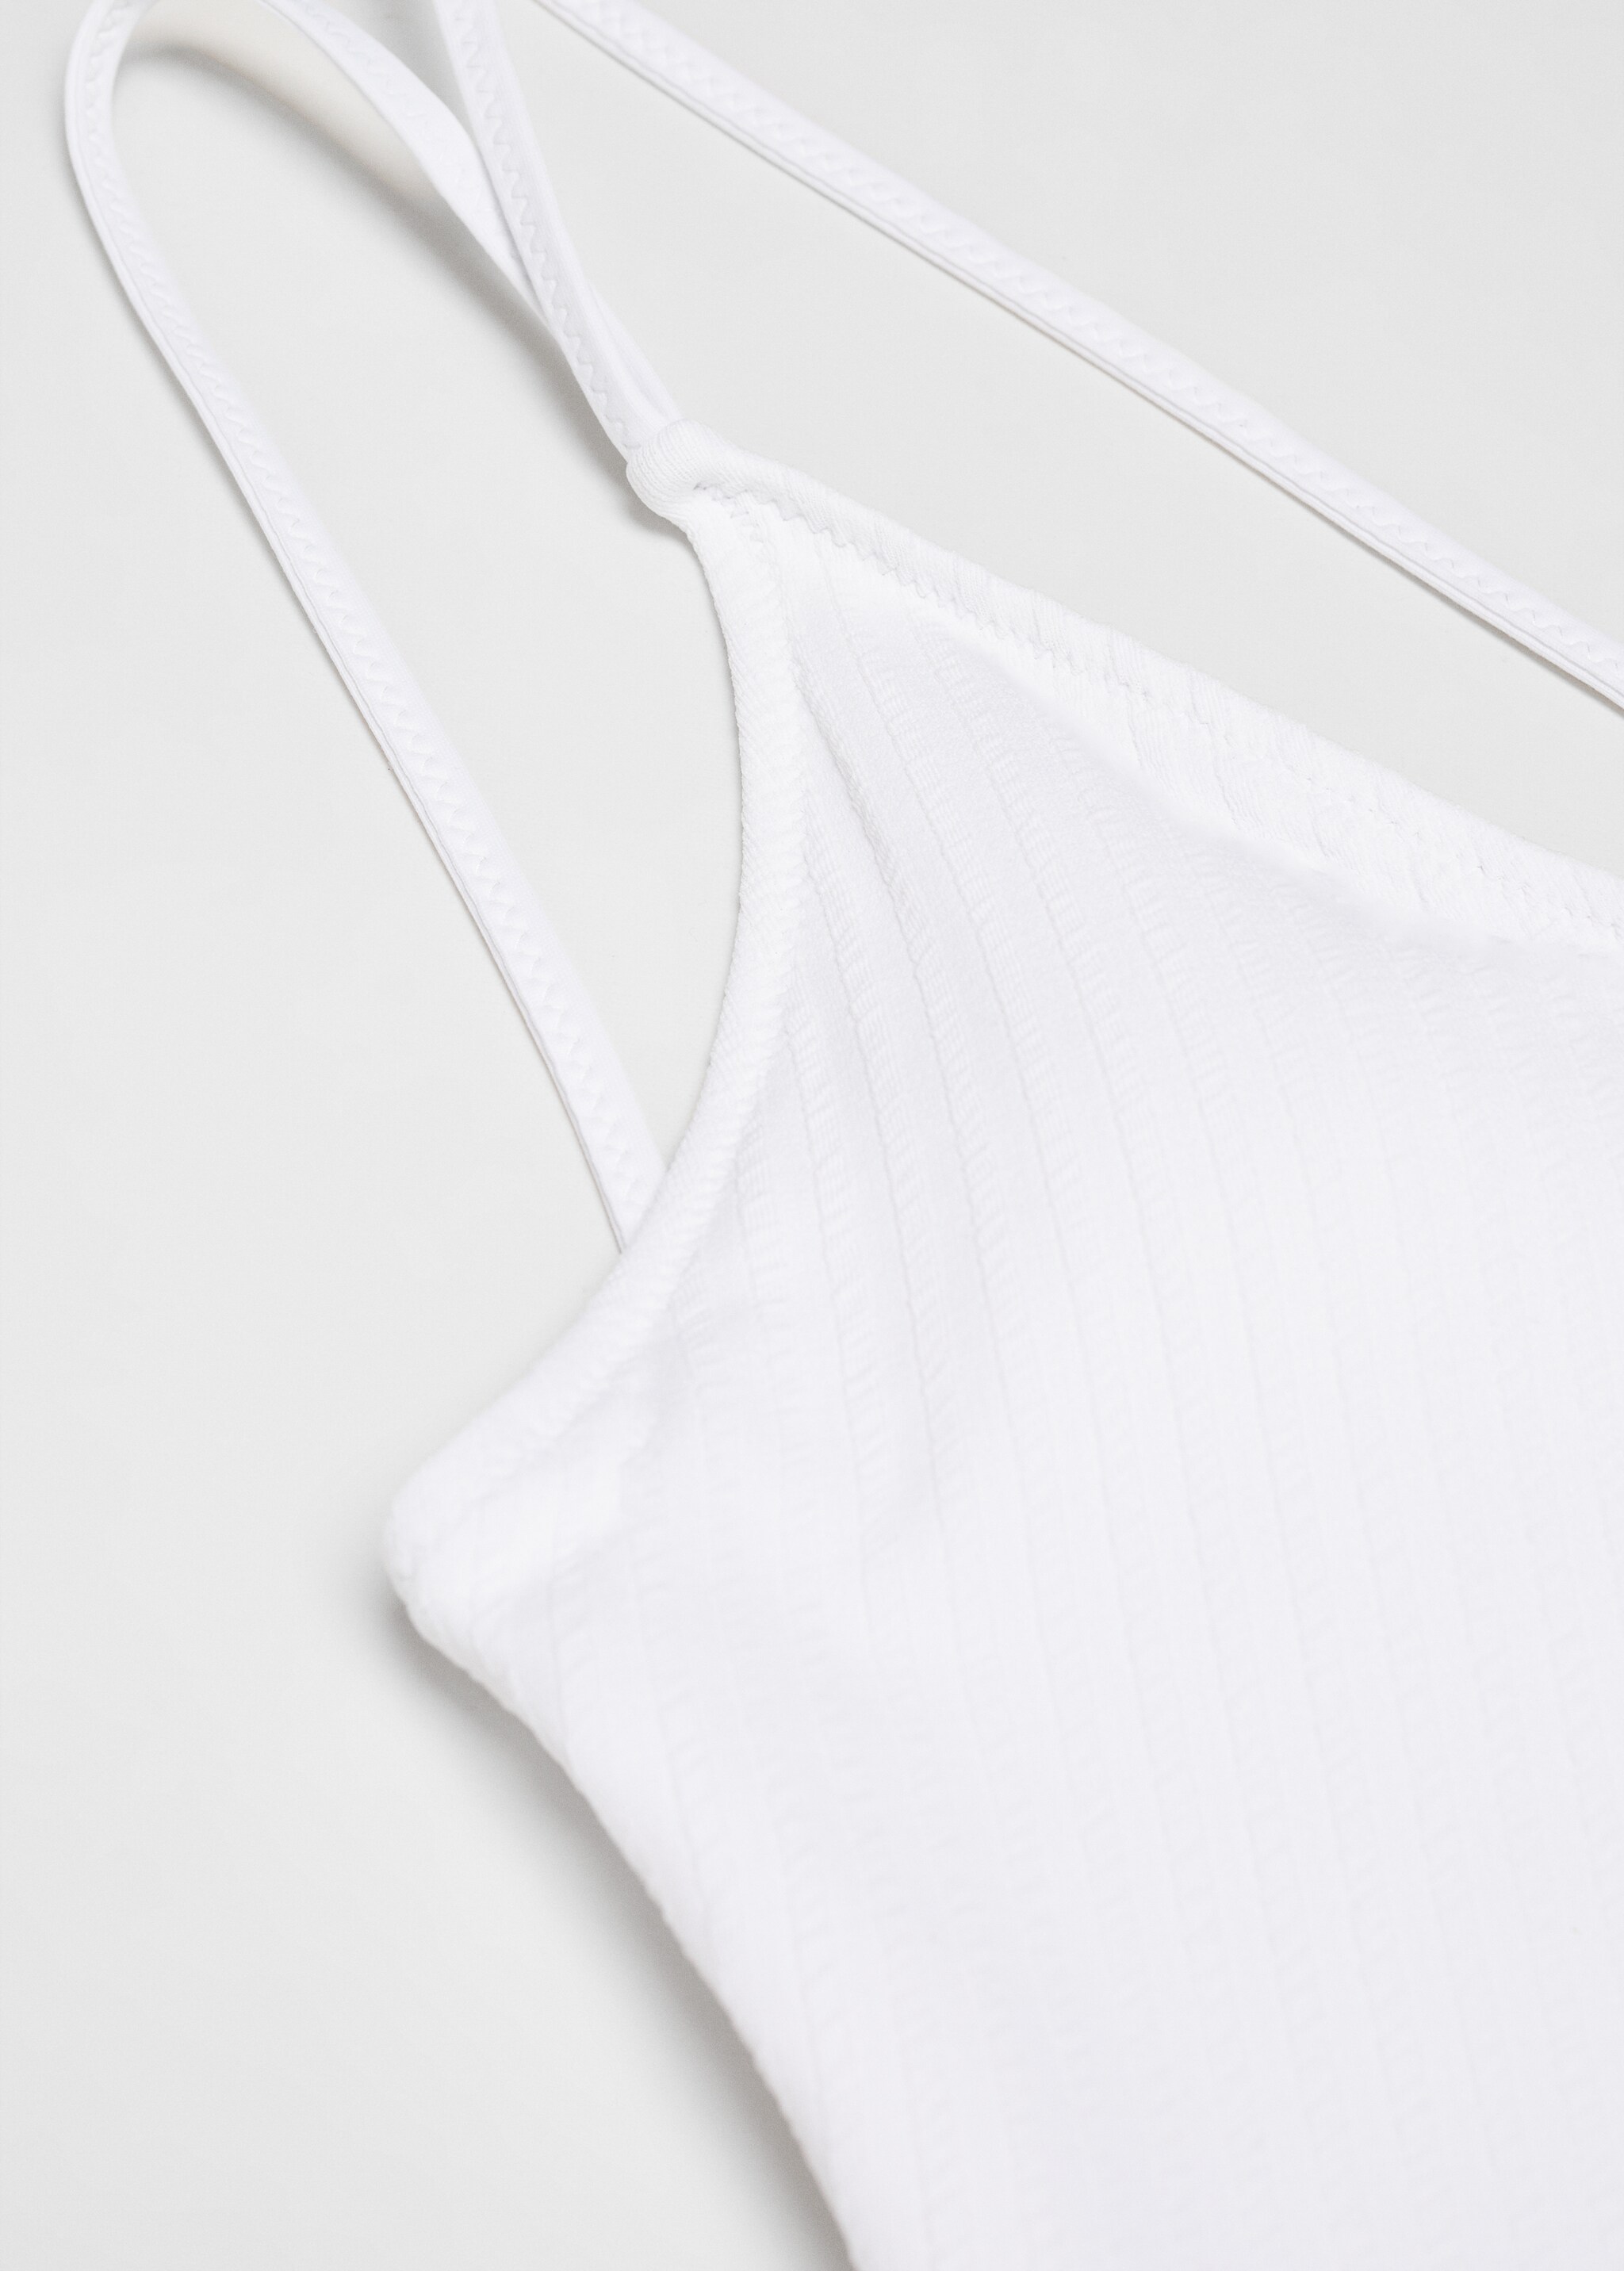 V-neck swimsuit - Details of the article 8